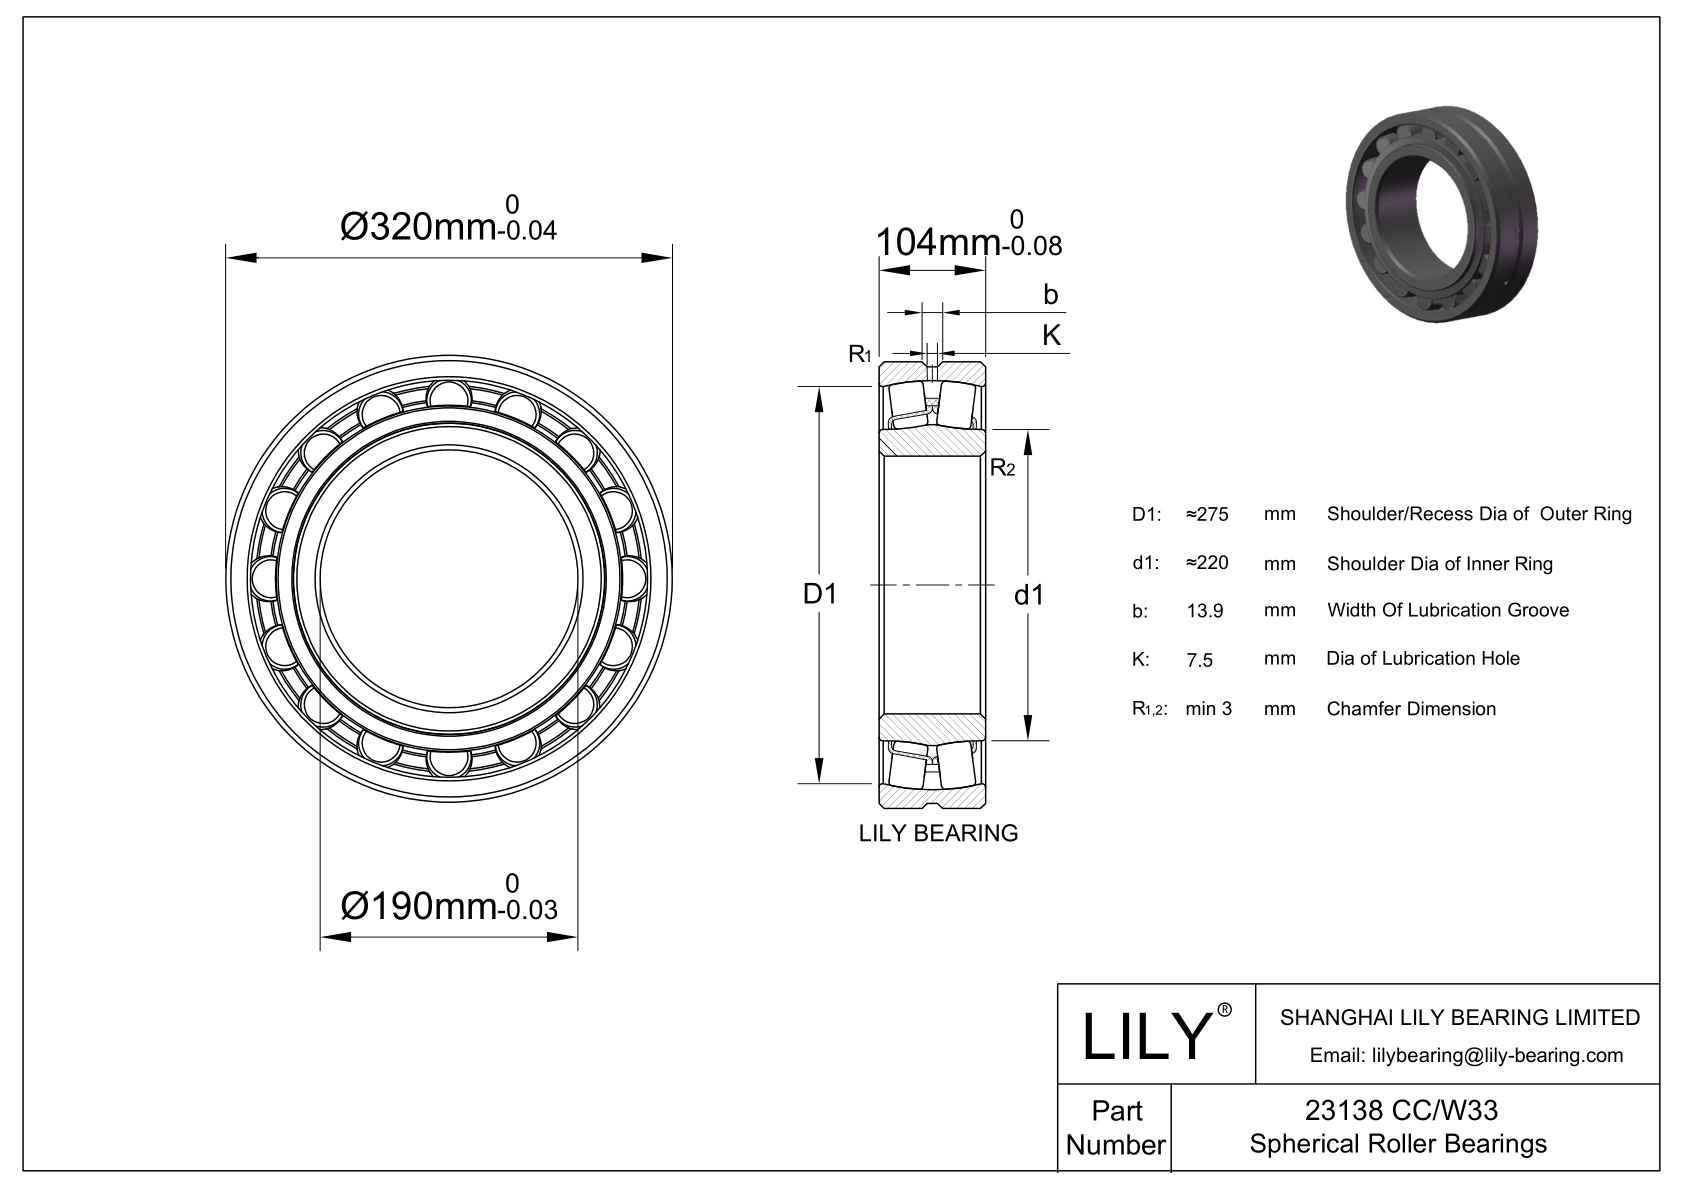 23138 CC/W33 Double Row Spherical Roller Bearing cad drawing